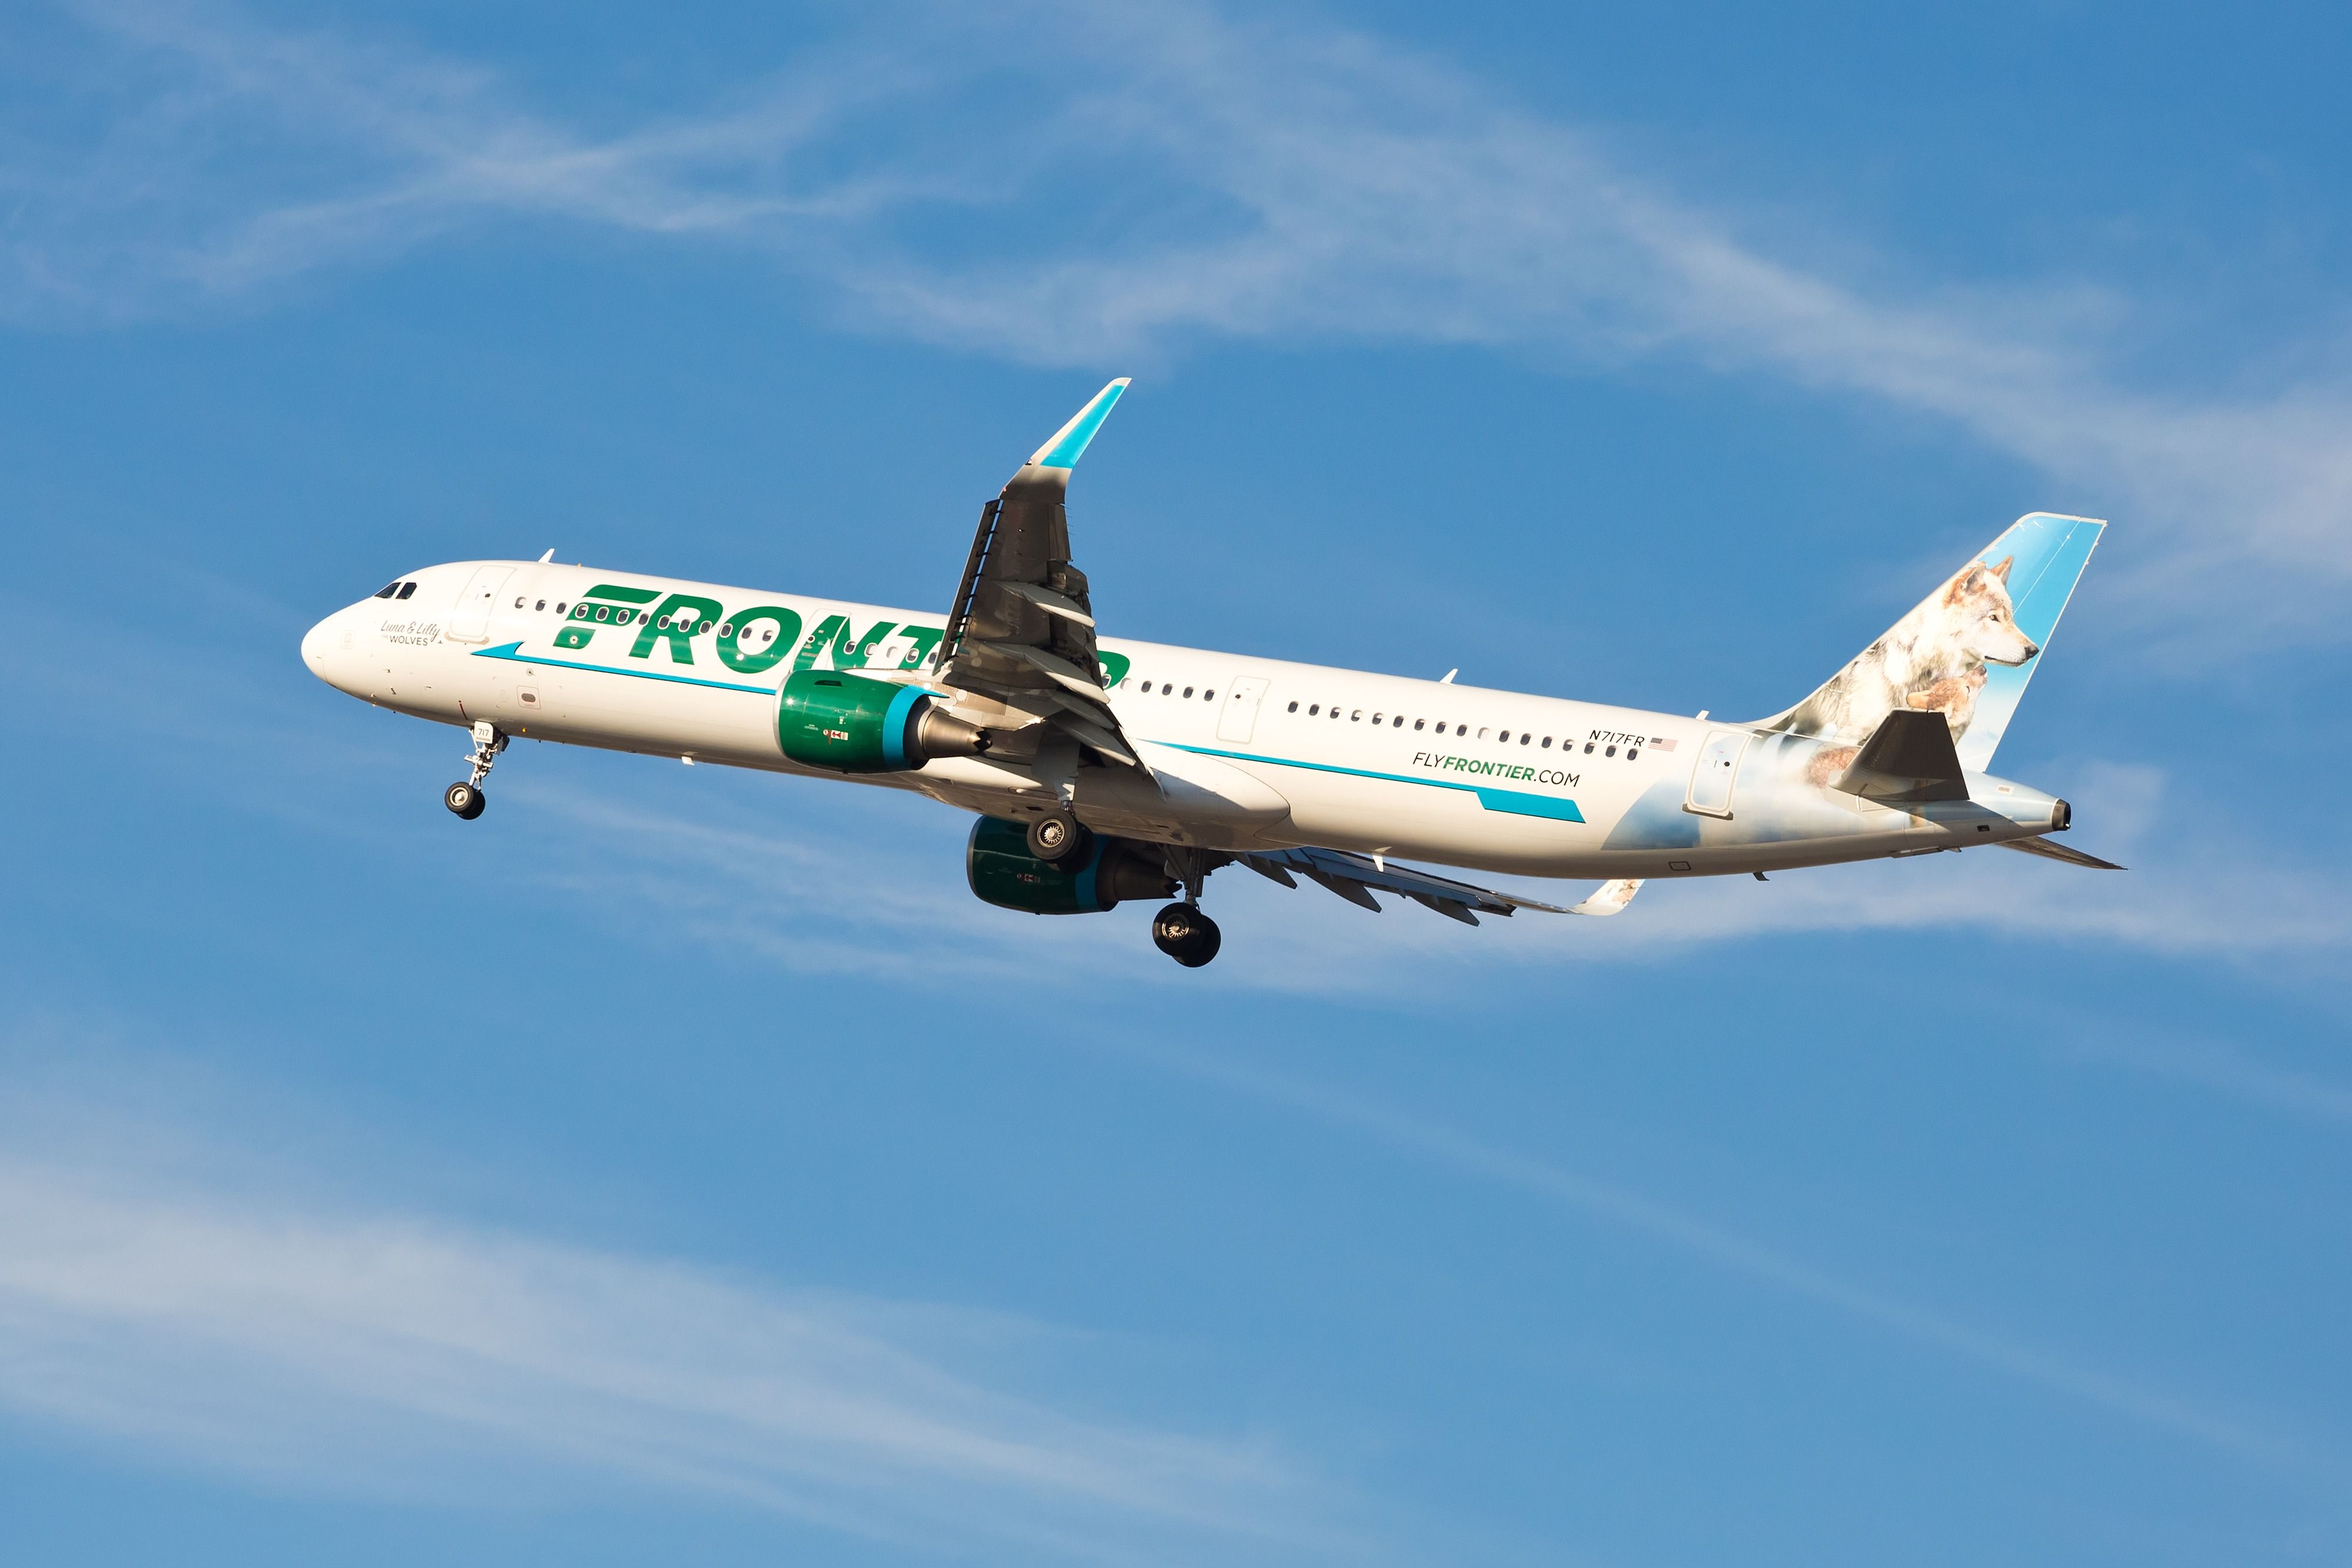 A Frontier Airlines Airbus A321 flying in the sky.